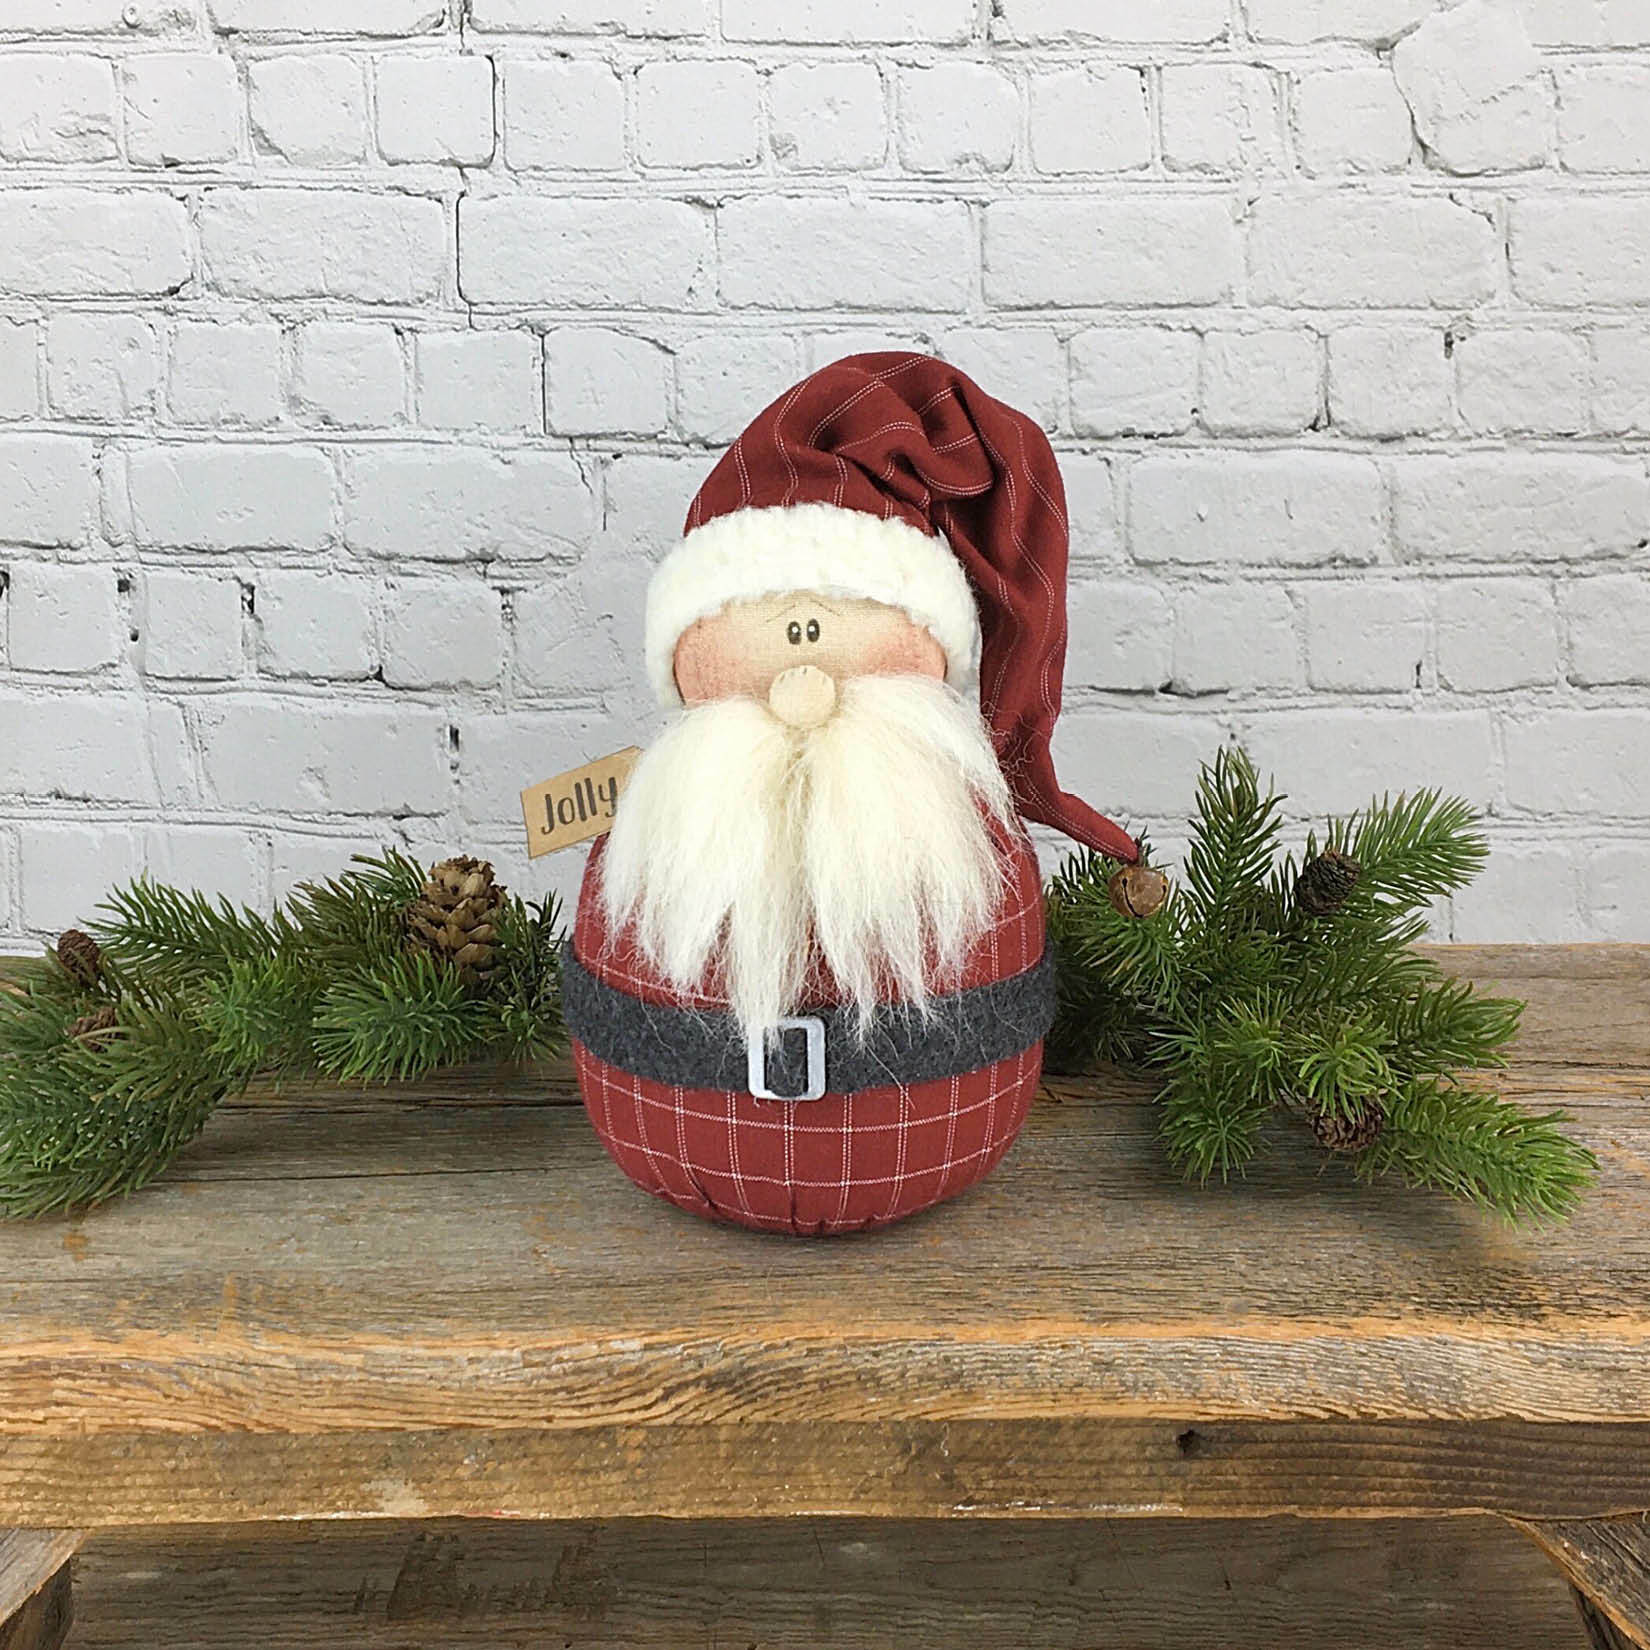 Jolly the Whimsey Santa Claus